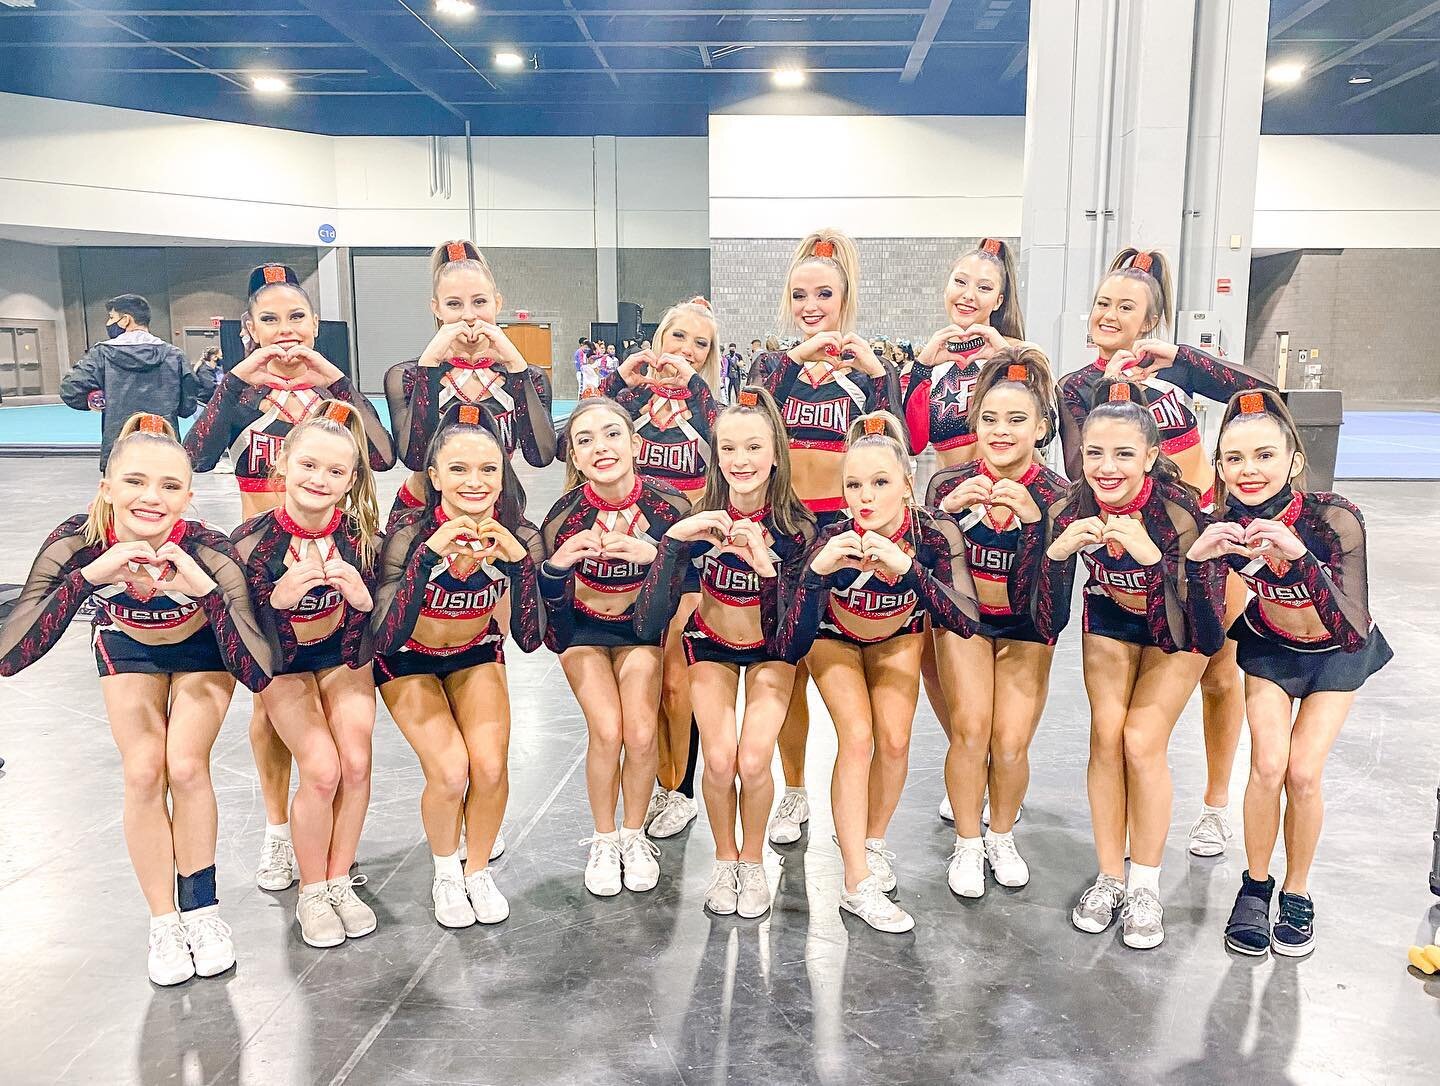 Here comes BOMB SQUAD in the warm up!!!! Sending all their hearts and love to every one on Valentines Day!!! Send them some 💗💗💗💗 #fusionswag #fusionbombsquad